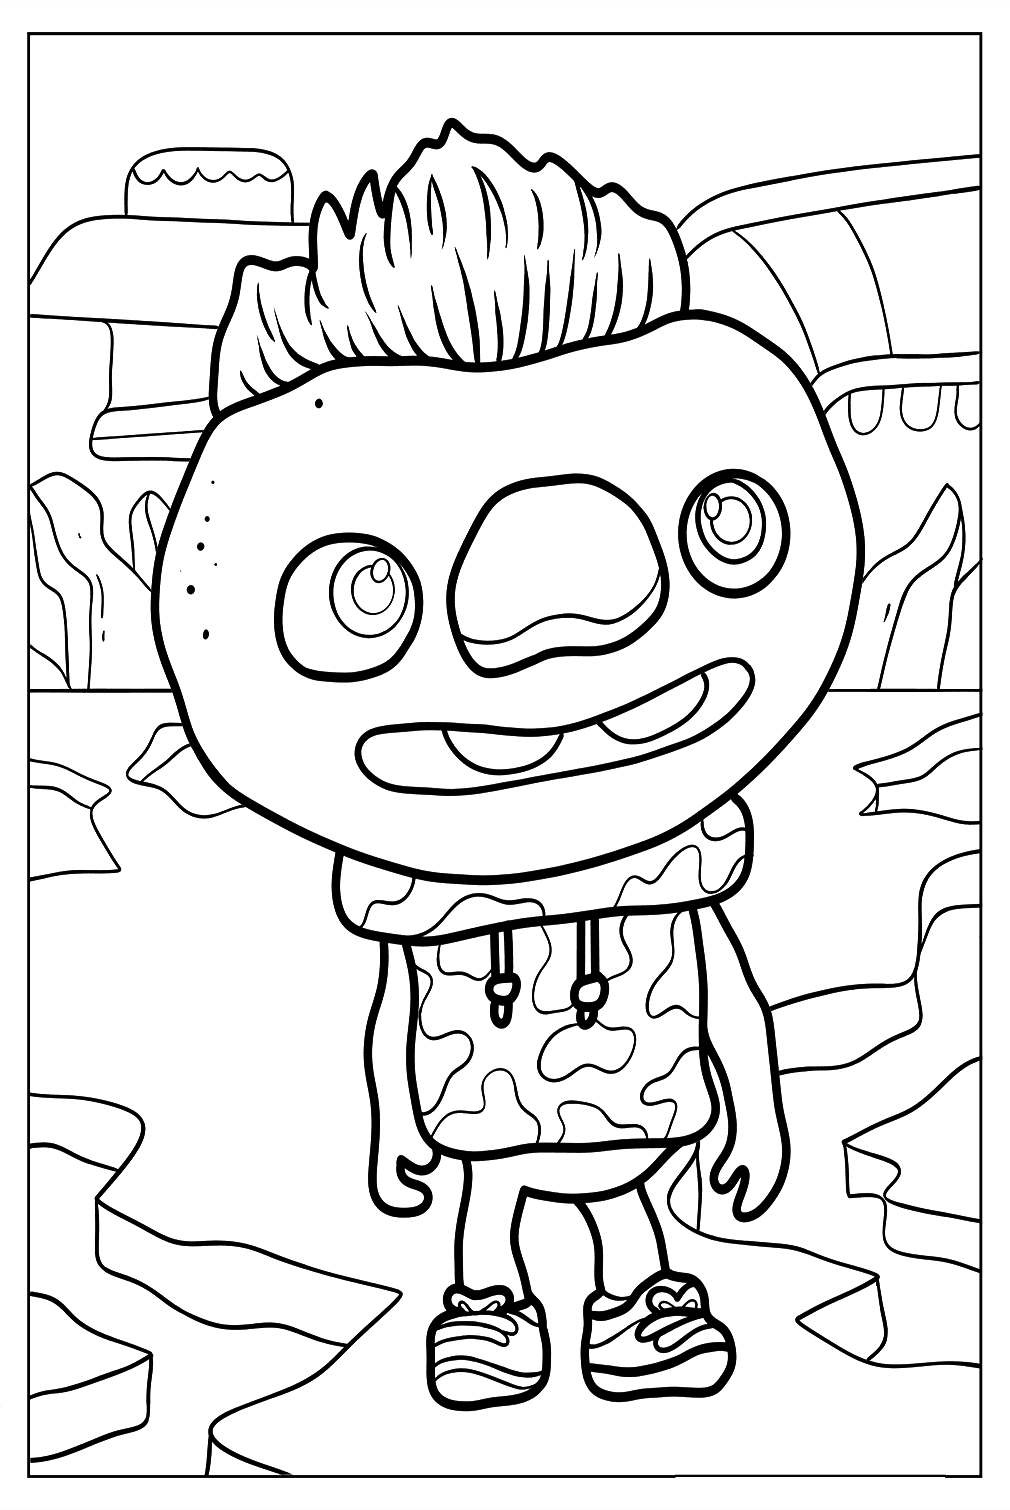 Cute Clod From Elemental Coloring Page For Kids